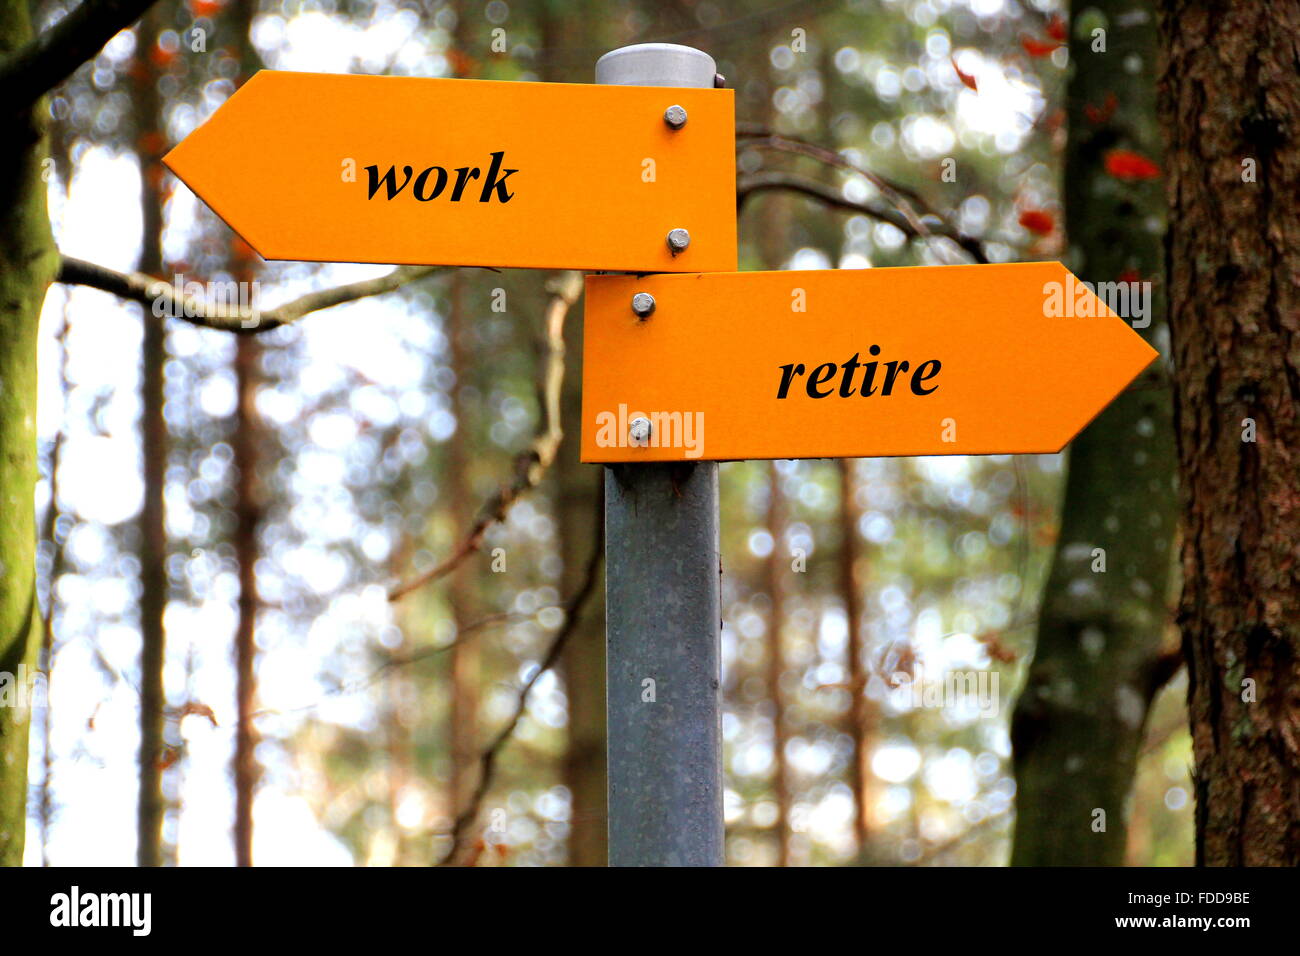 work and retire written on a yellow direction sign Stock Photo